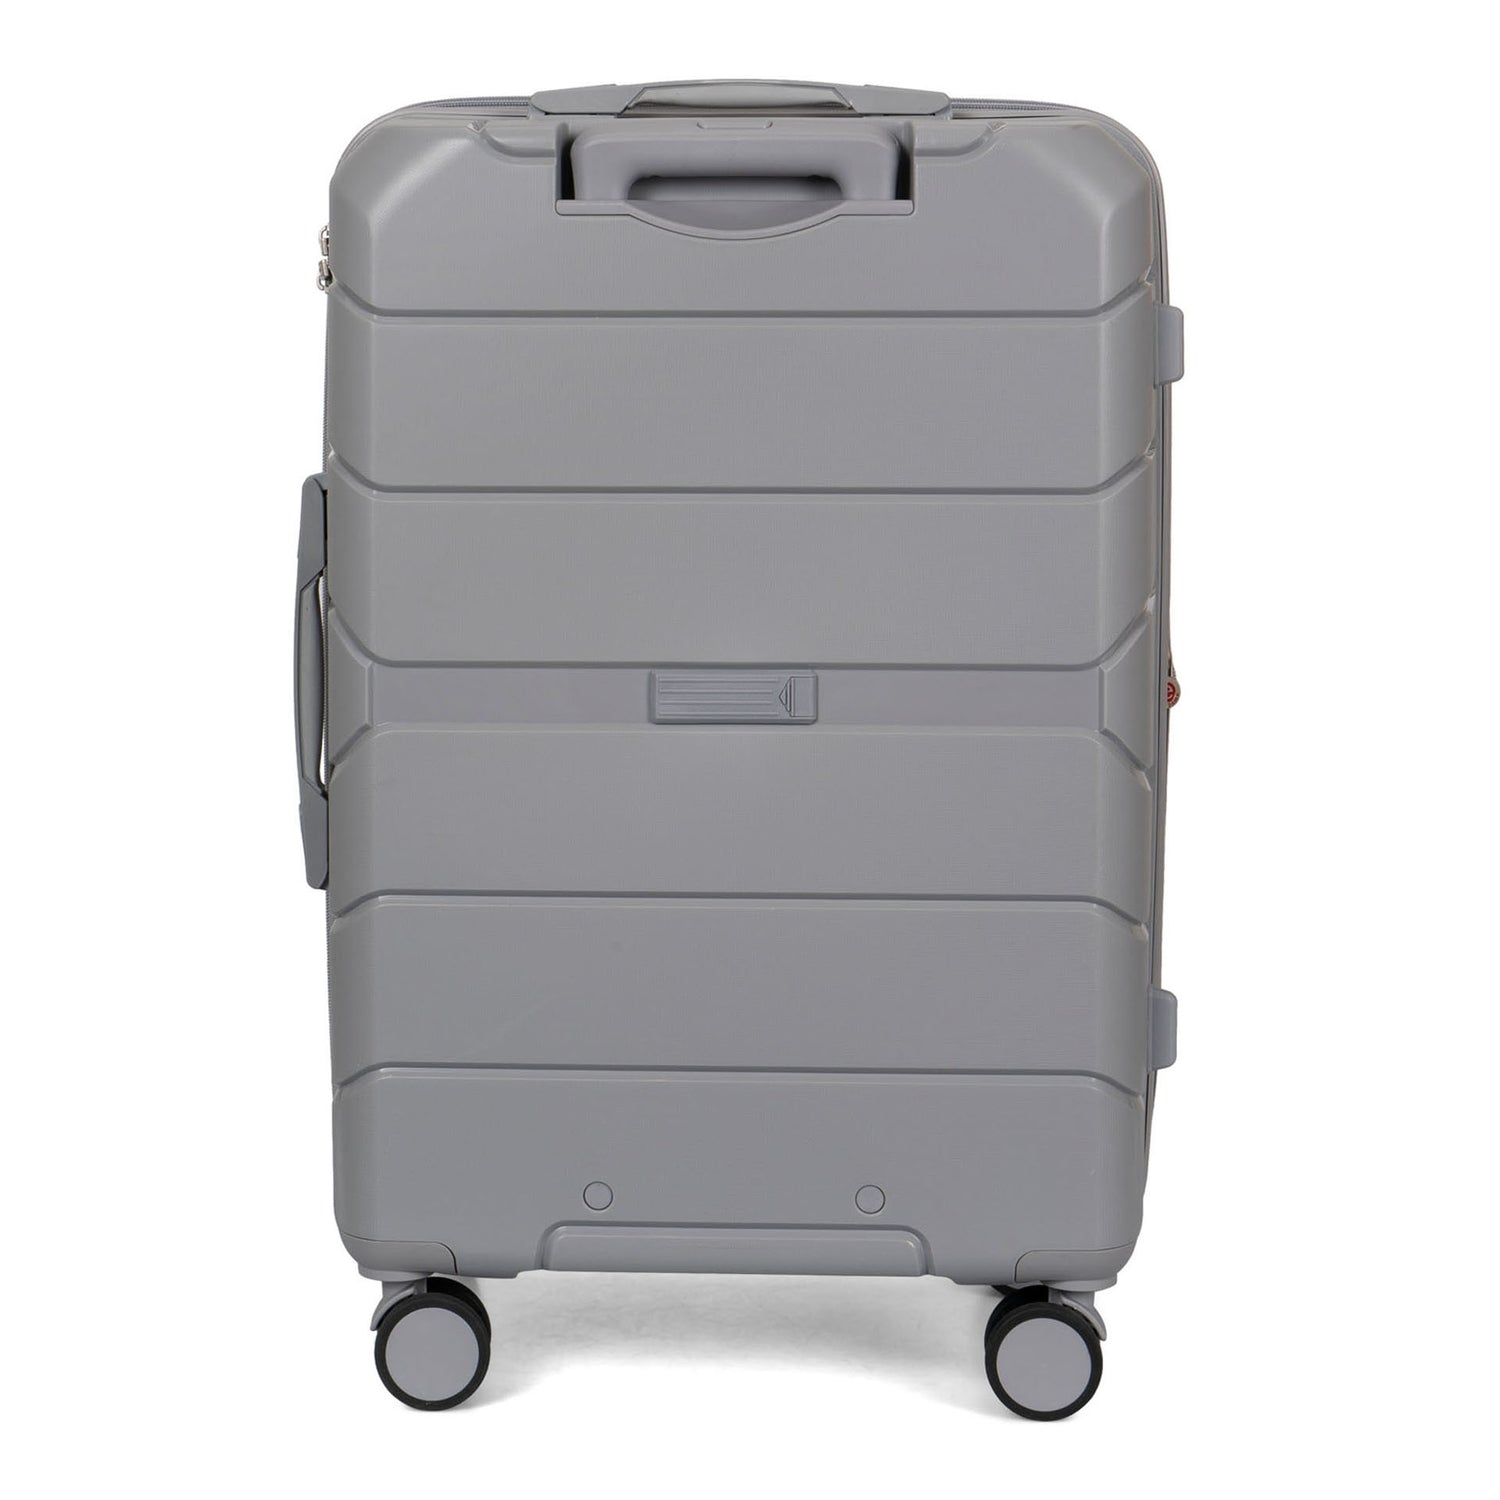 Back side view of a balck hard side luggage called Altitude designed by Air Canada sold at Bentley, showcasing its resistant shell texture.